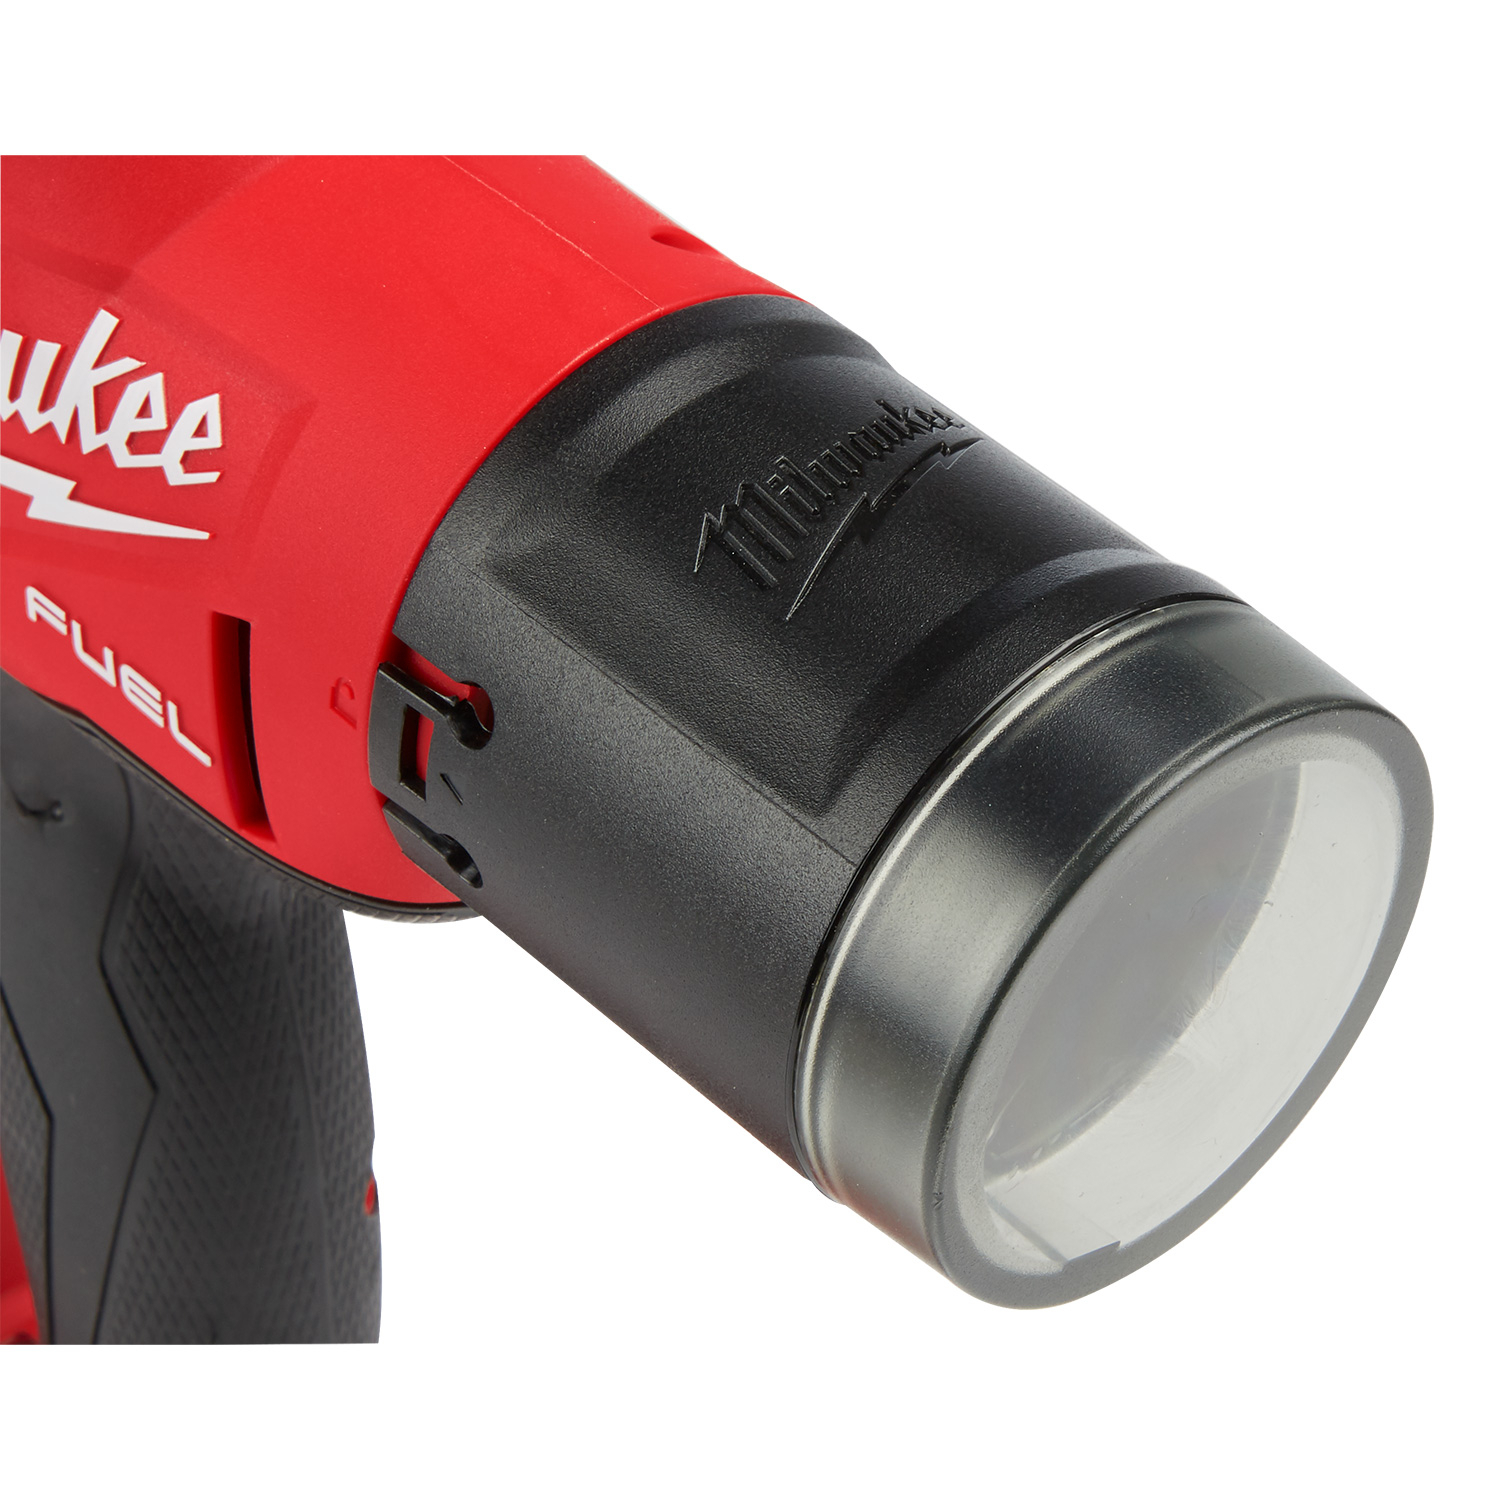 Milwaukee 18V Fuel 1/4" Rivet Tool with ONE-KEY (Tool Only) M18FPRT-0